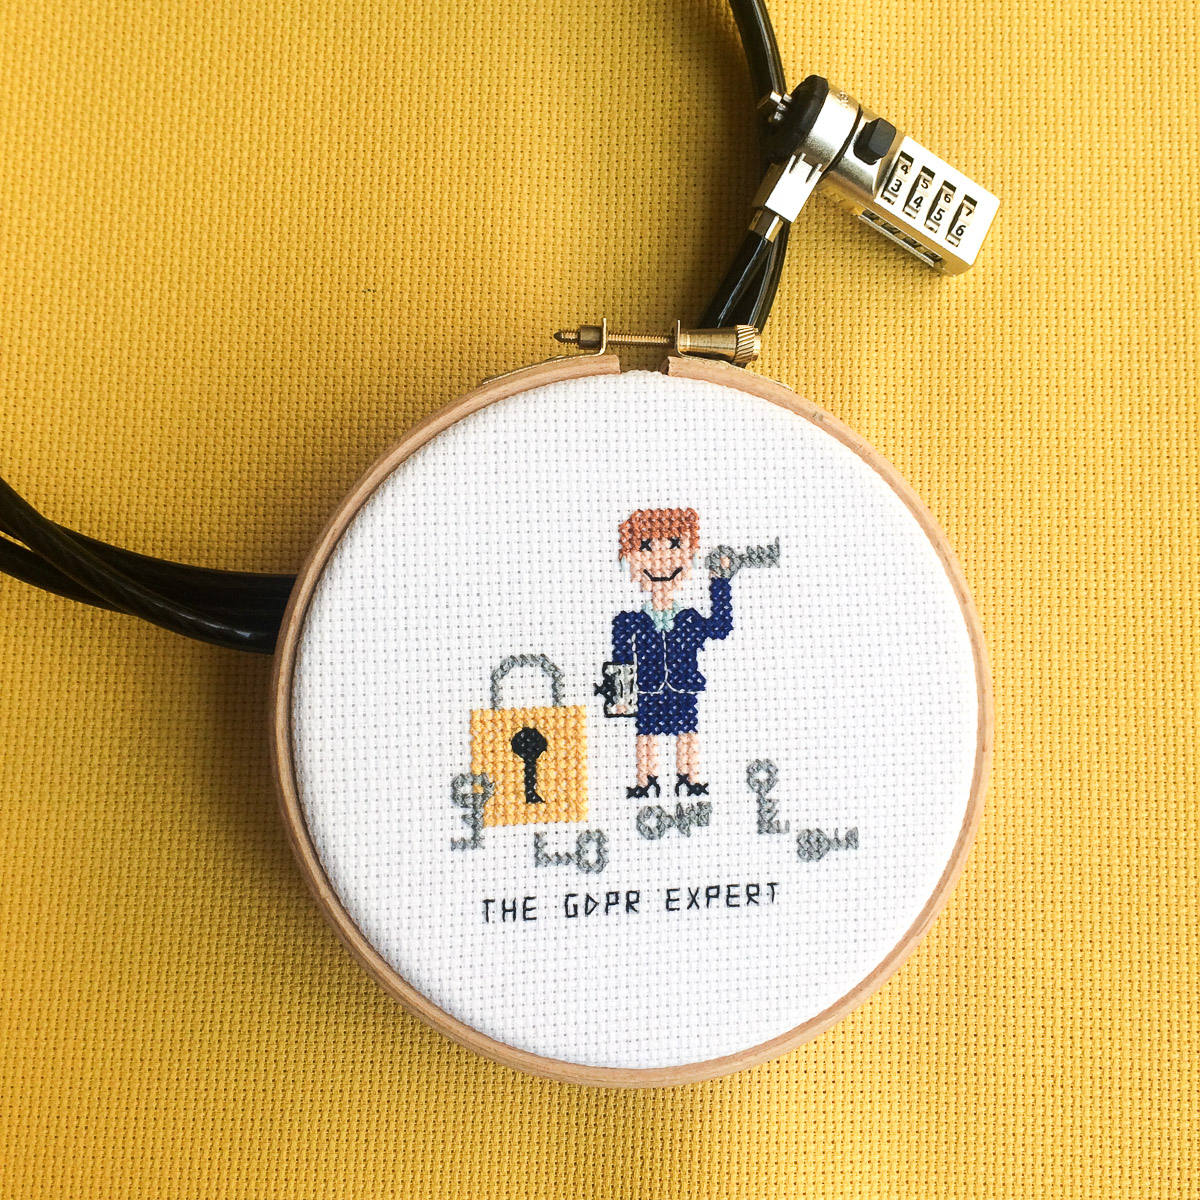 Funny Embroidery Patterns 2 X Diy Gift For Privacy Officer Cross Stitch Pattern Funny Gift Idea For Gdpr Expert Modern Cross Stitch Design